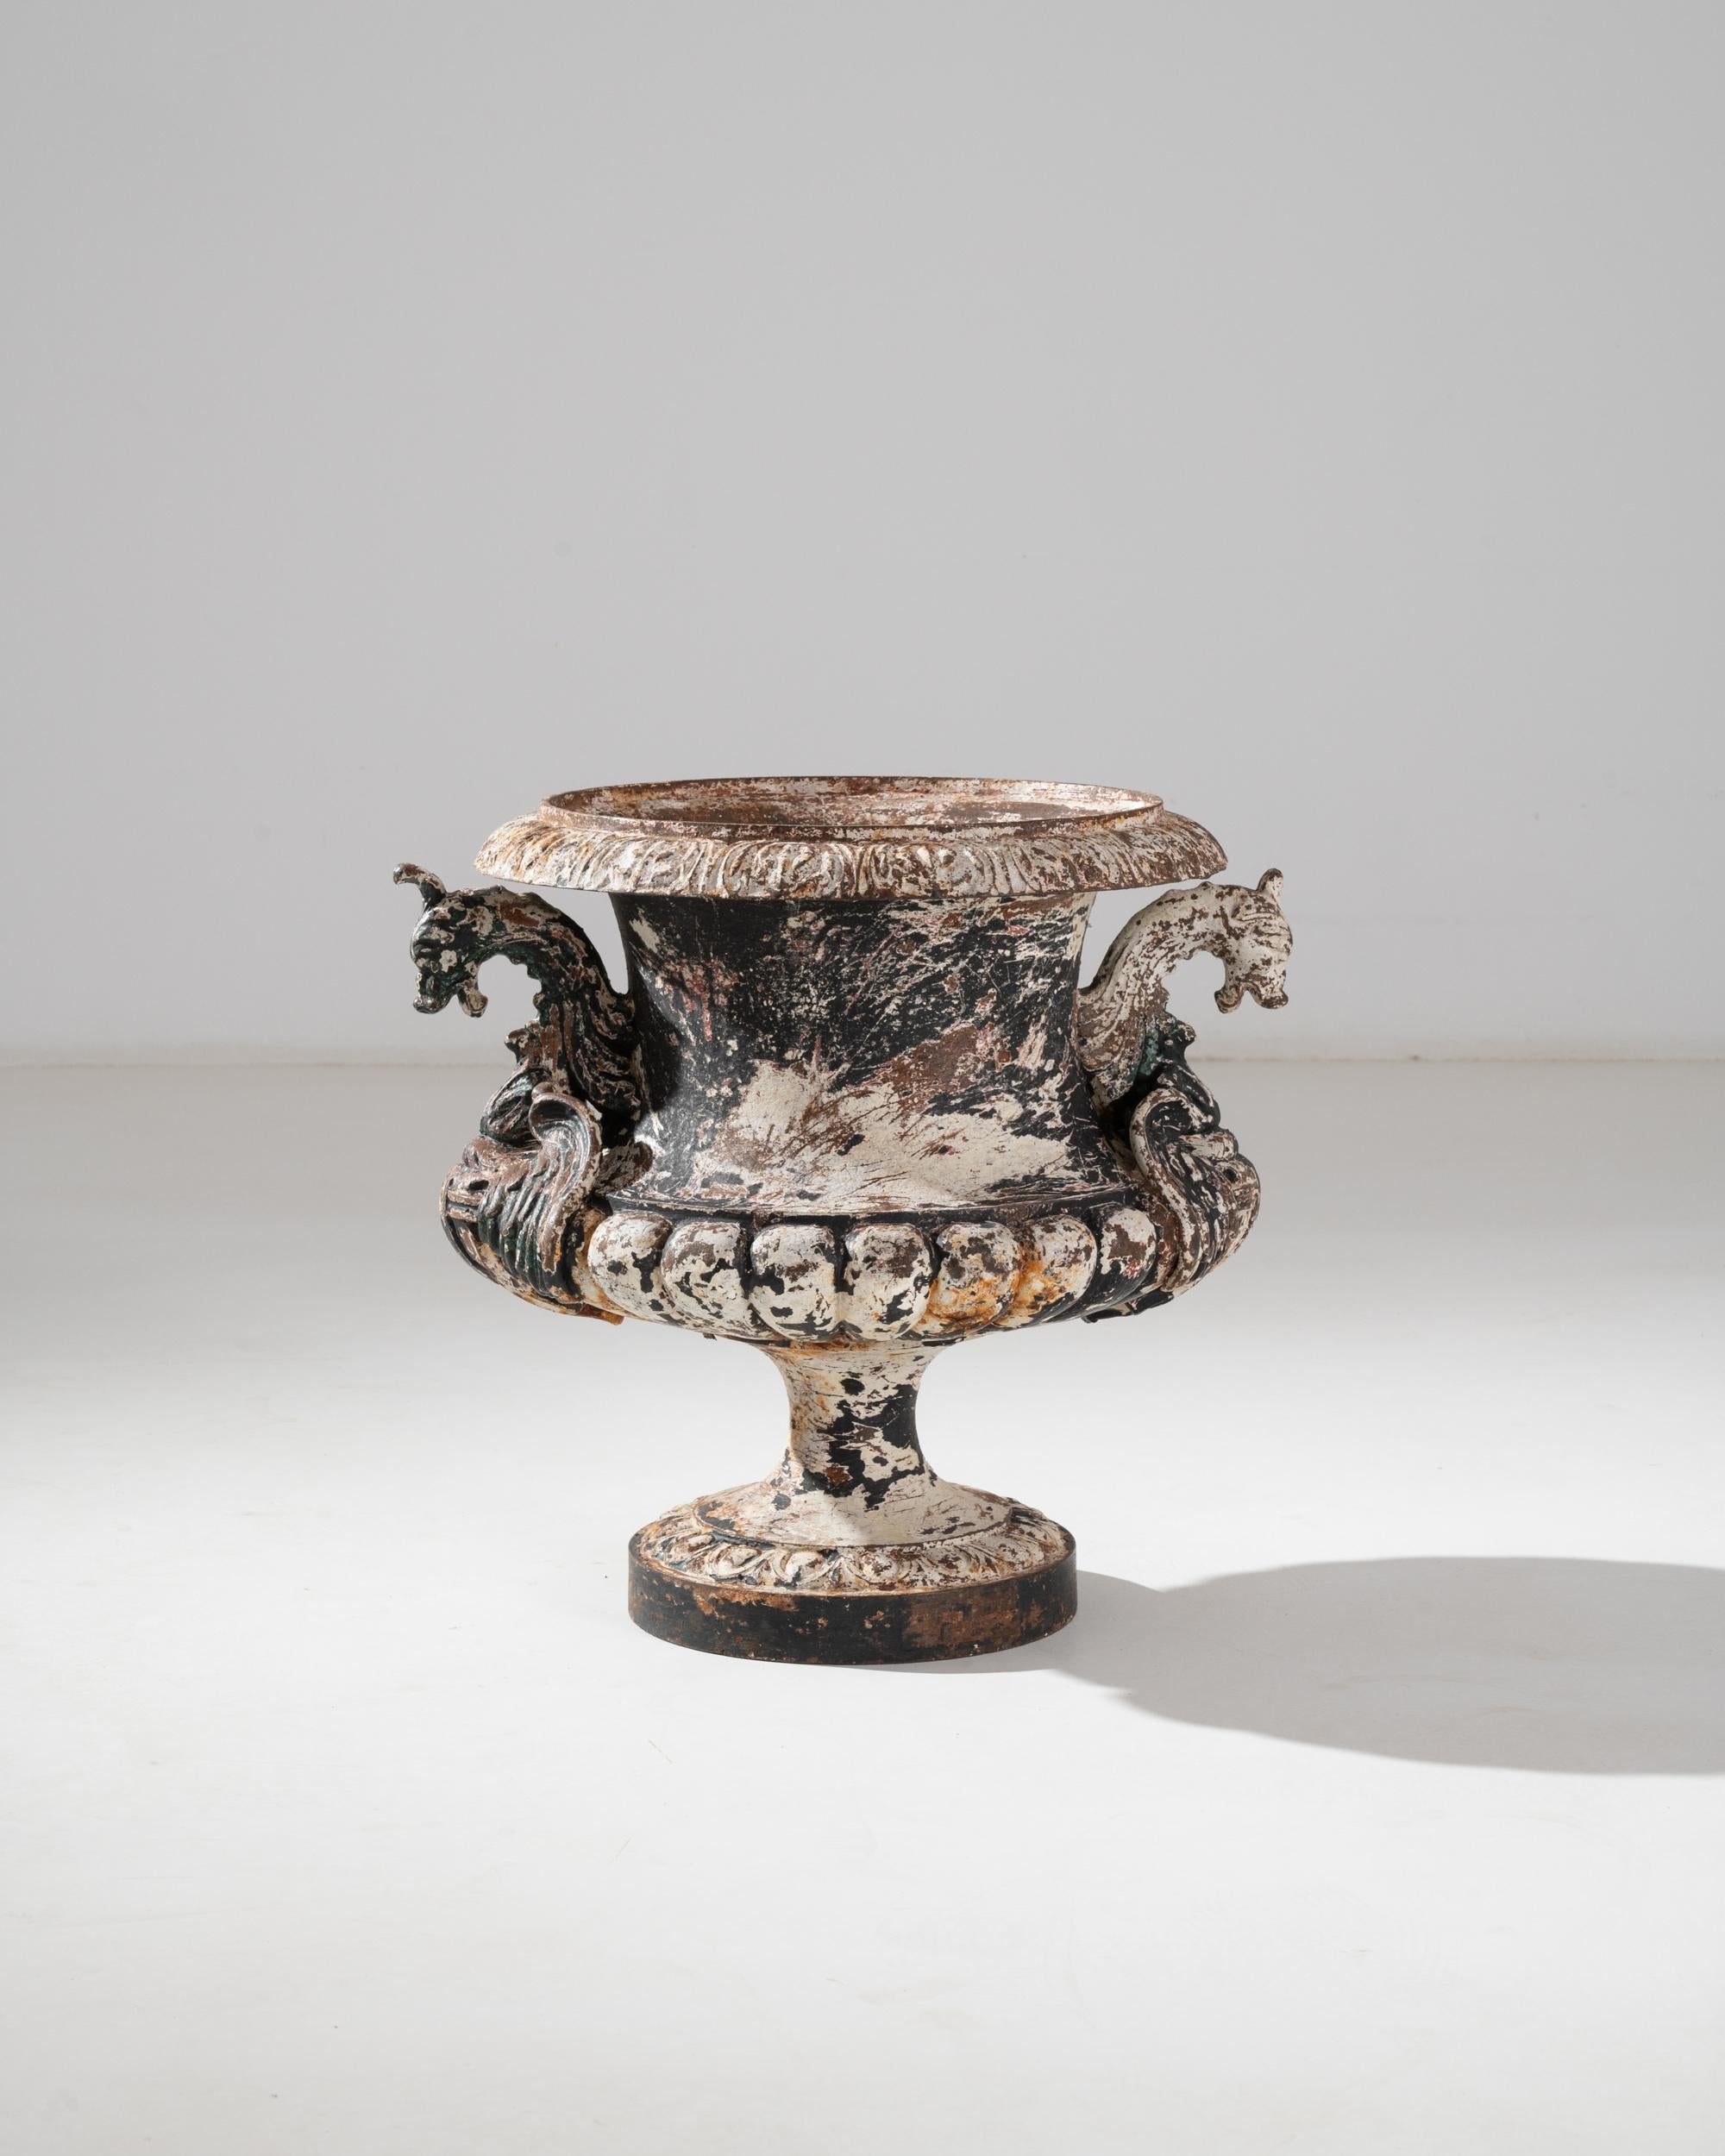 A cast iron planter from France, made in the 19th century. The campana shape resembled an upturned bell with a fluted cupola and broad lip, reminiscent of an opening blossom. Fantastic creatures make intruiging handles on either side of the urn.